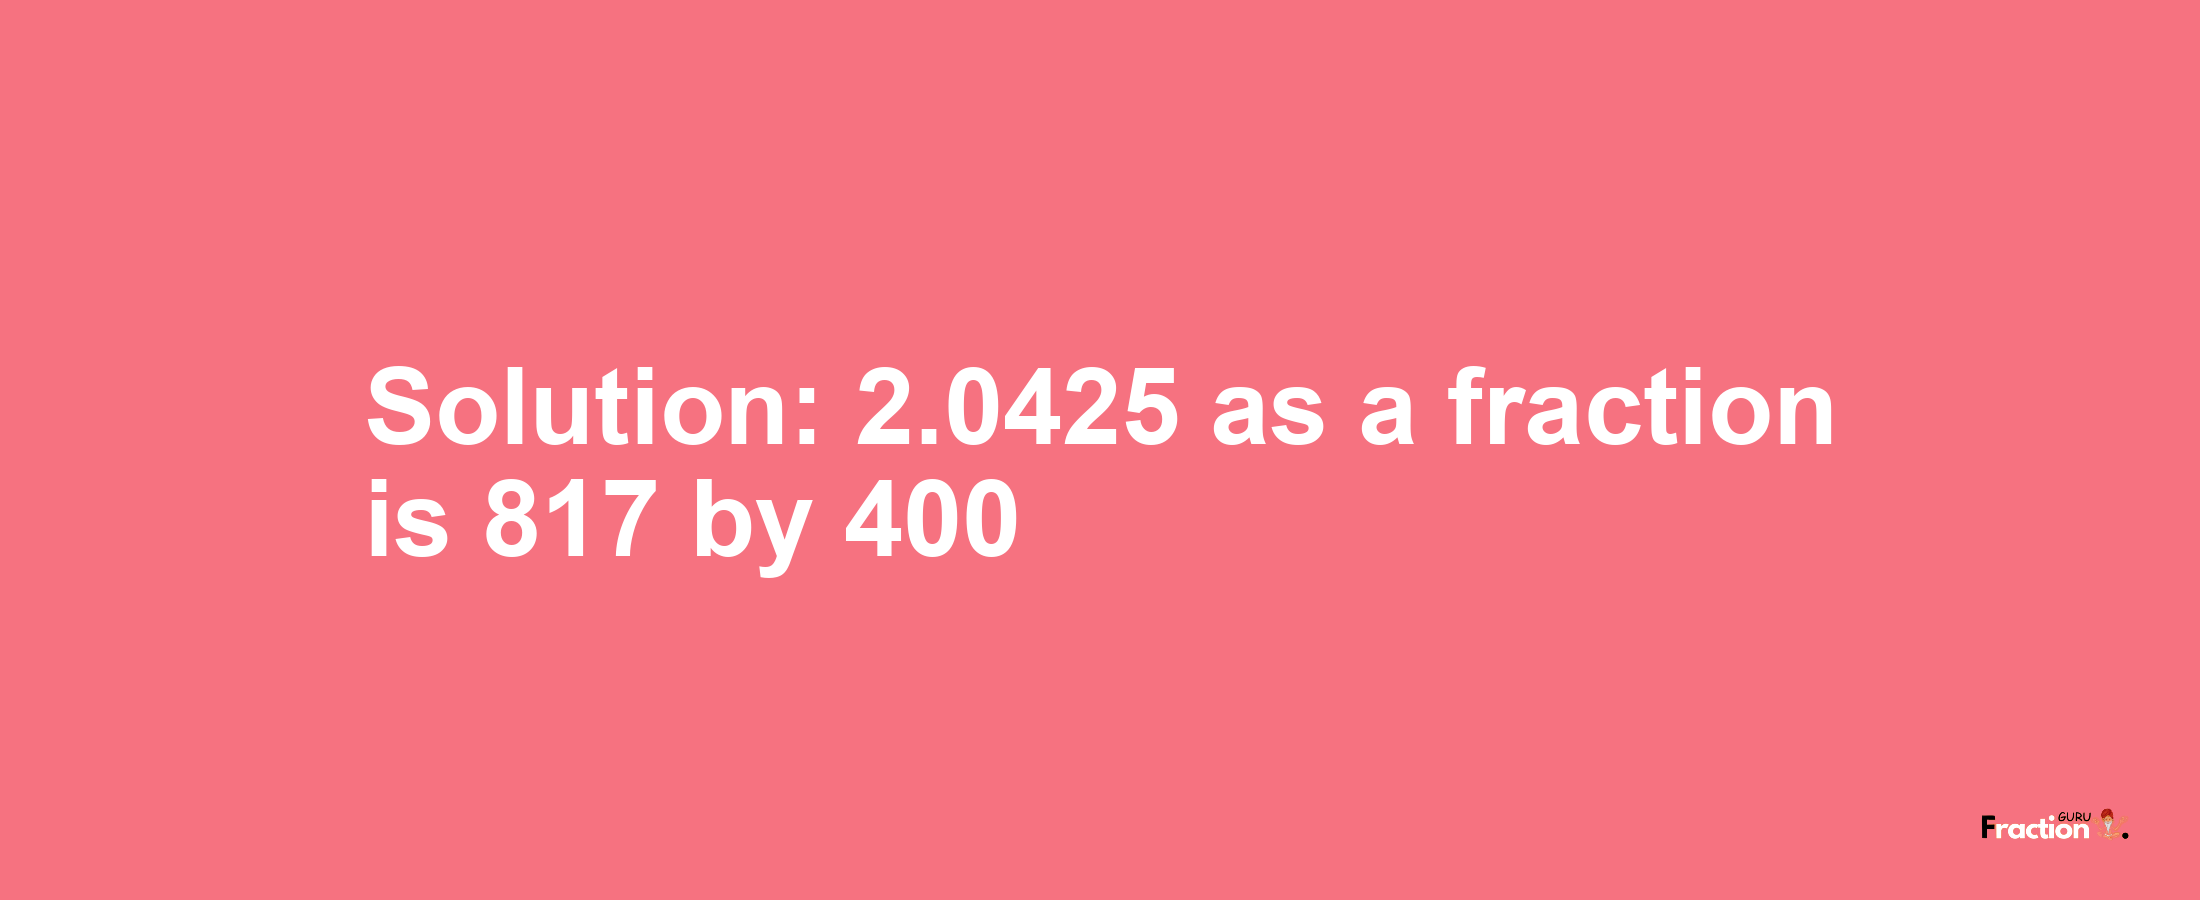 Solution:2.0425 as a fraction is 817/400